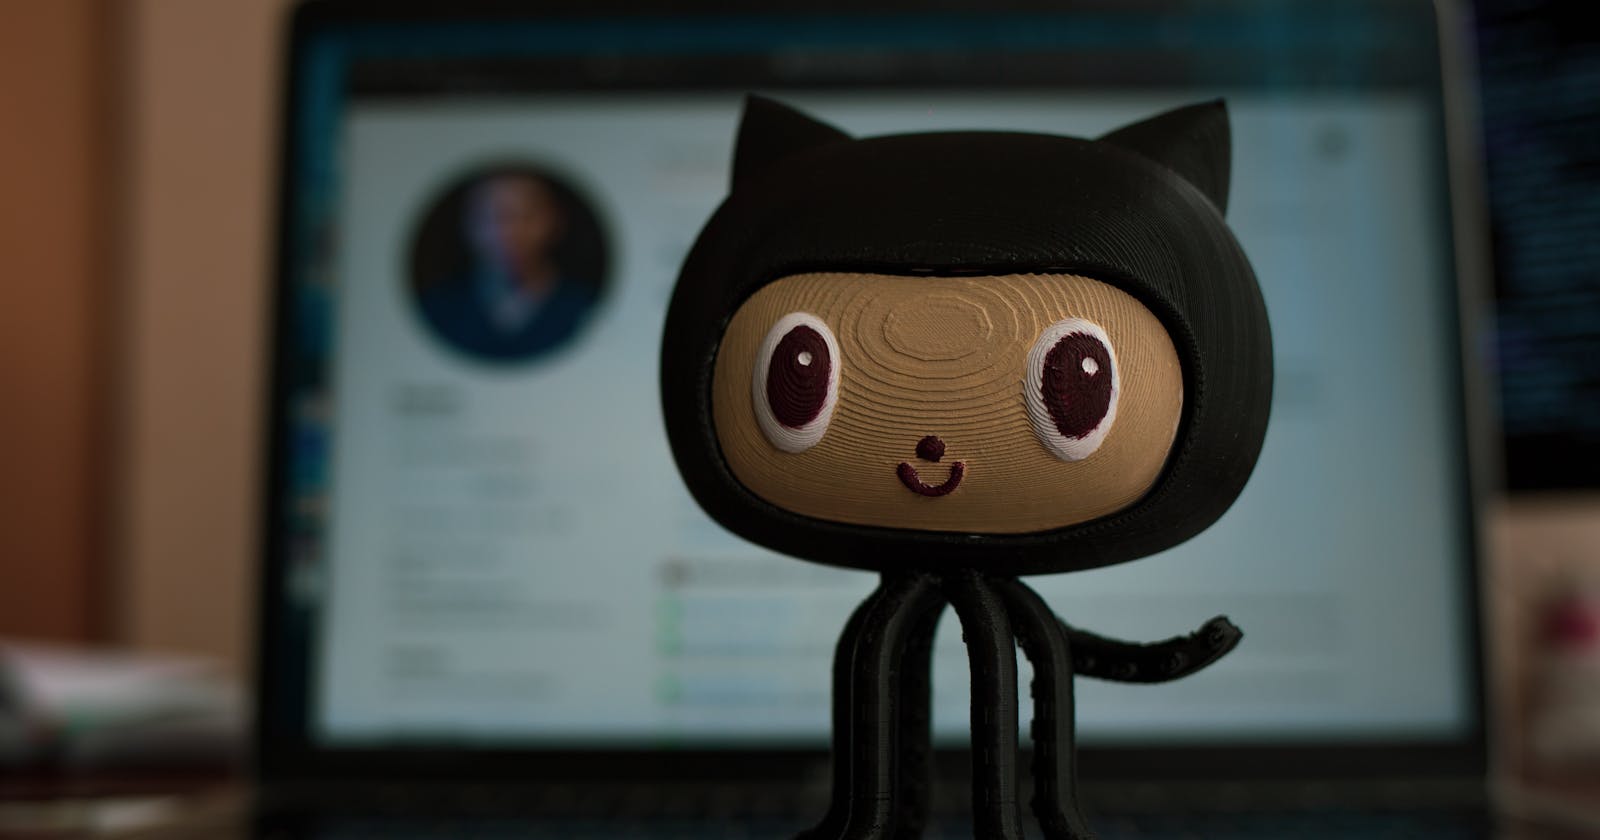 Blog 2: Let's Get Started on using Git and GitHub